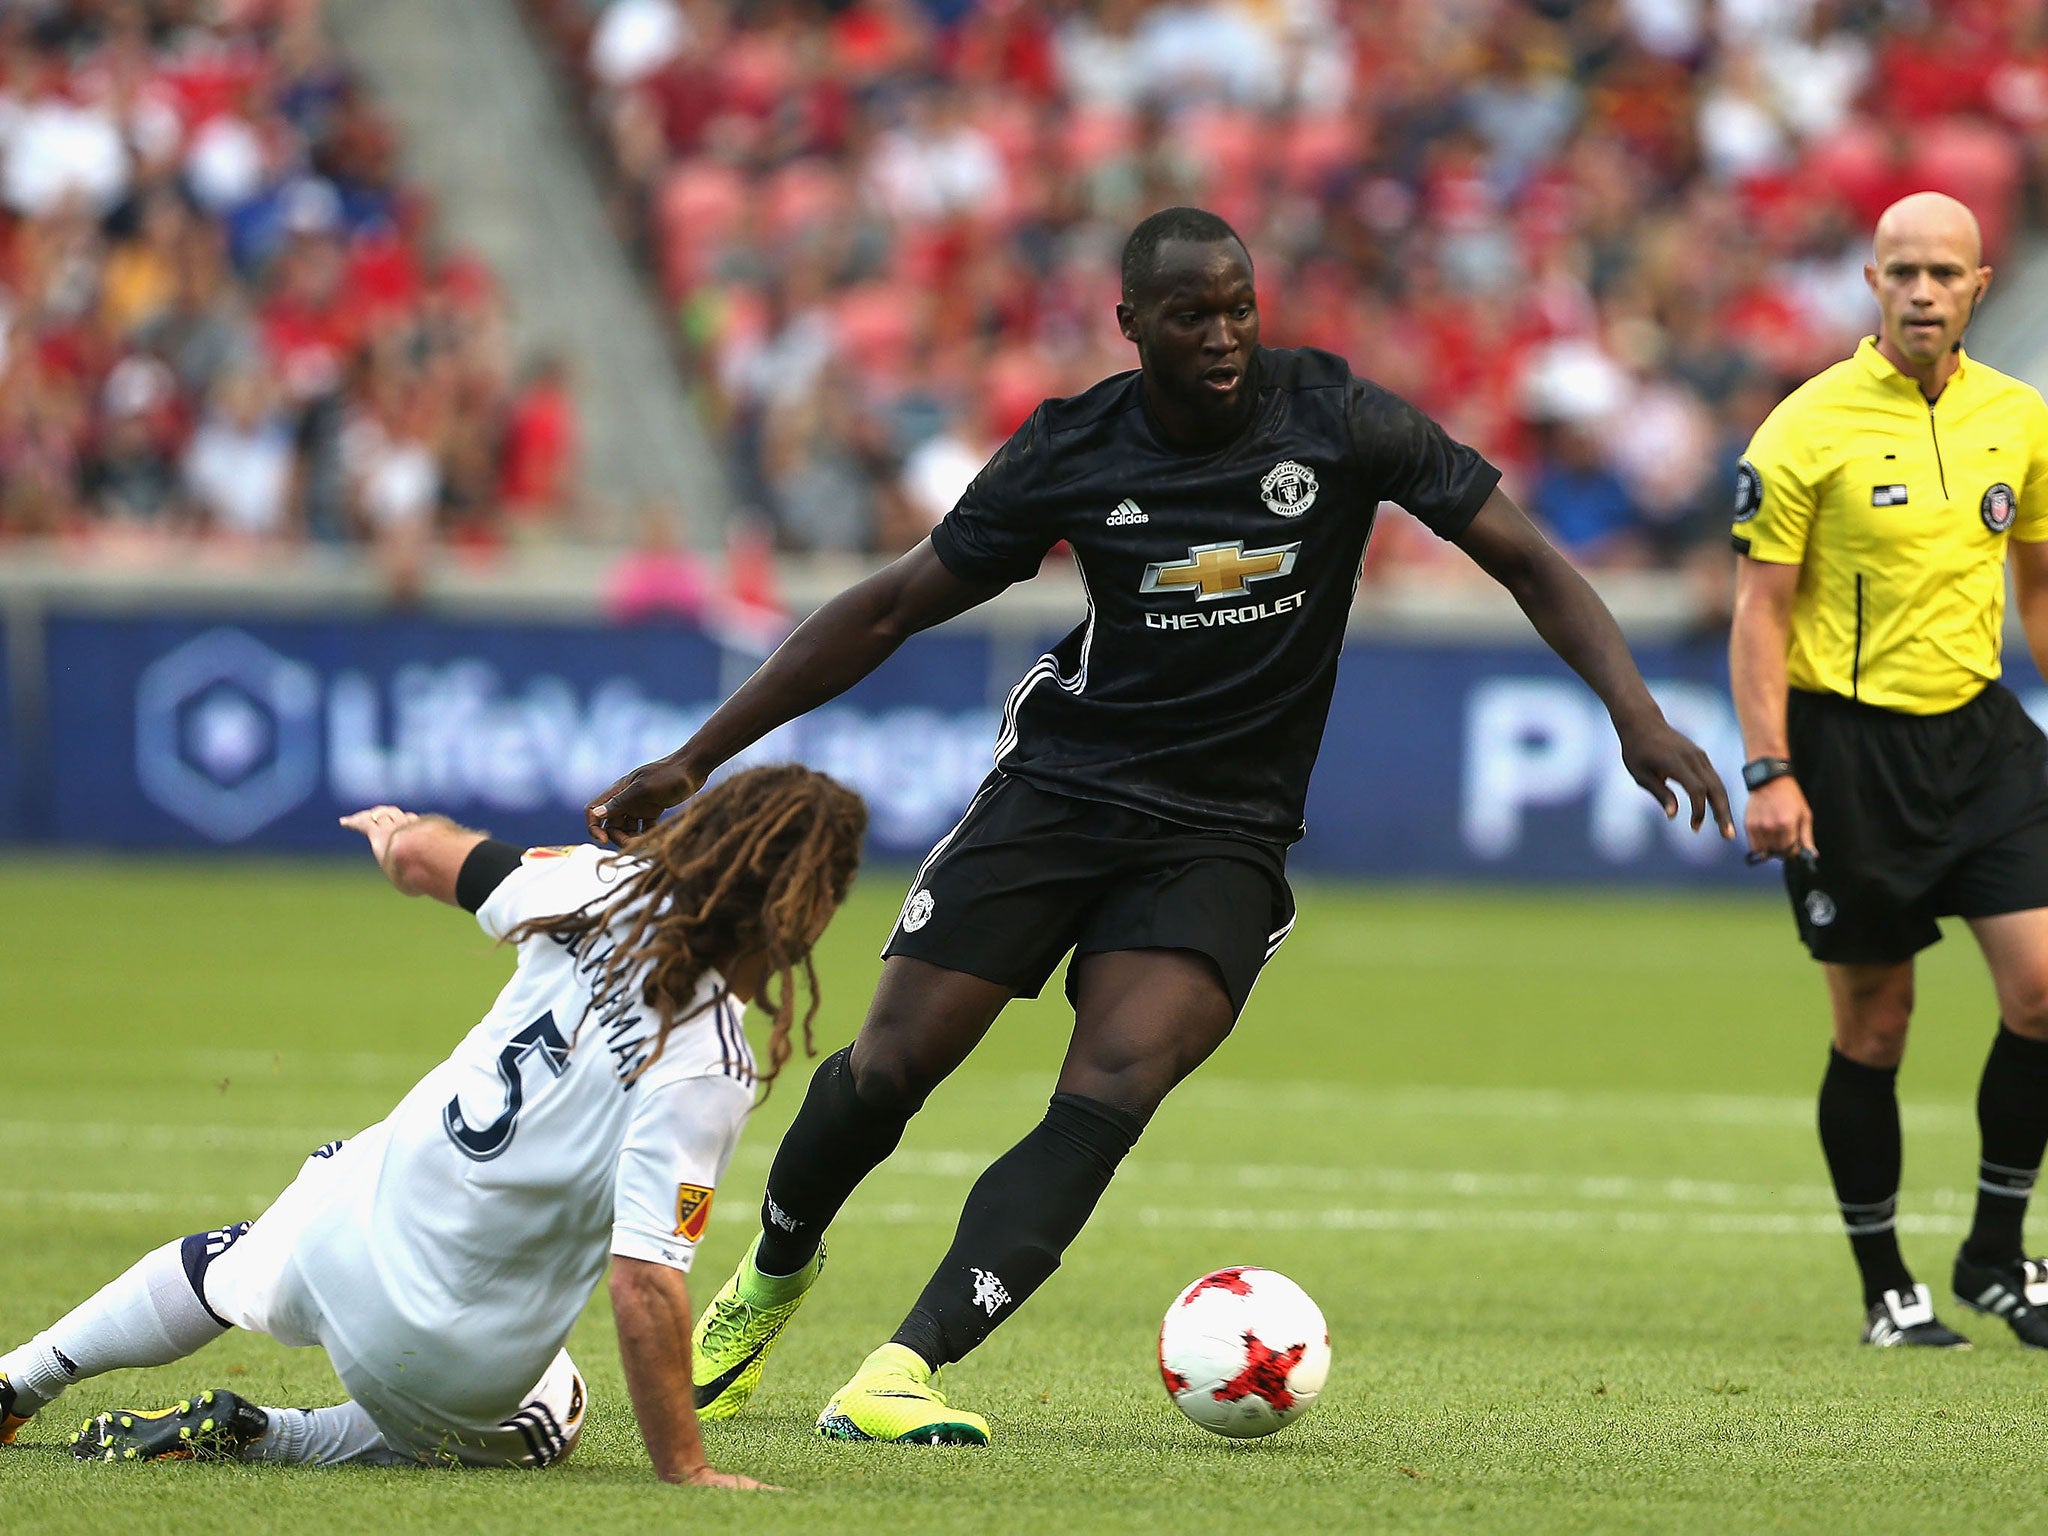 Romelu Lukaku in action for United in their second pre-season friendly of the US tour